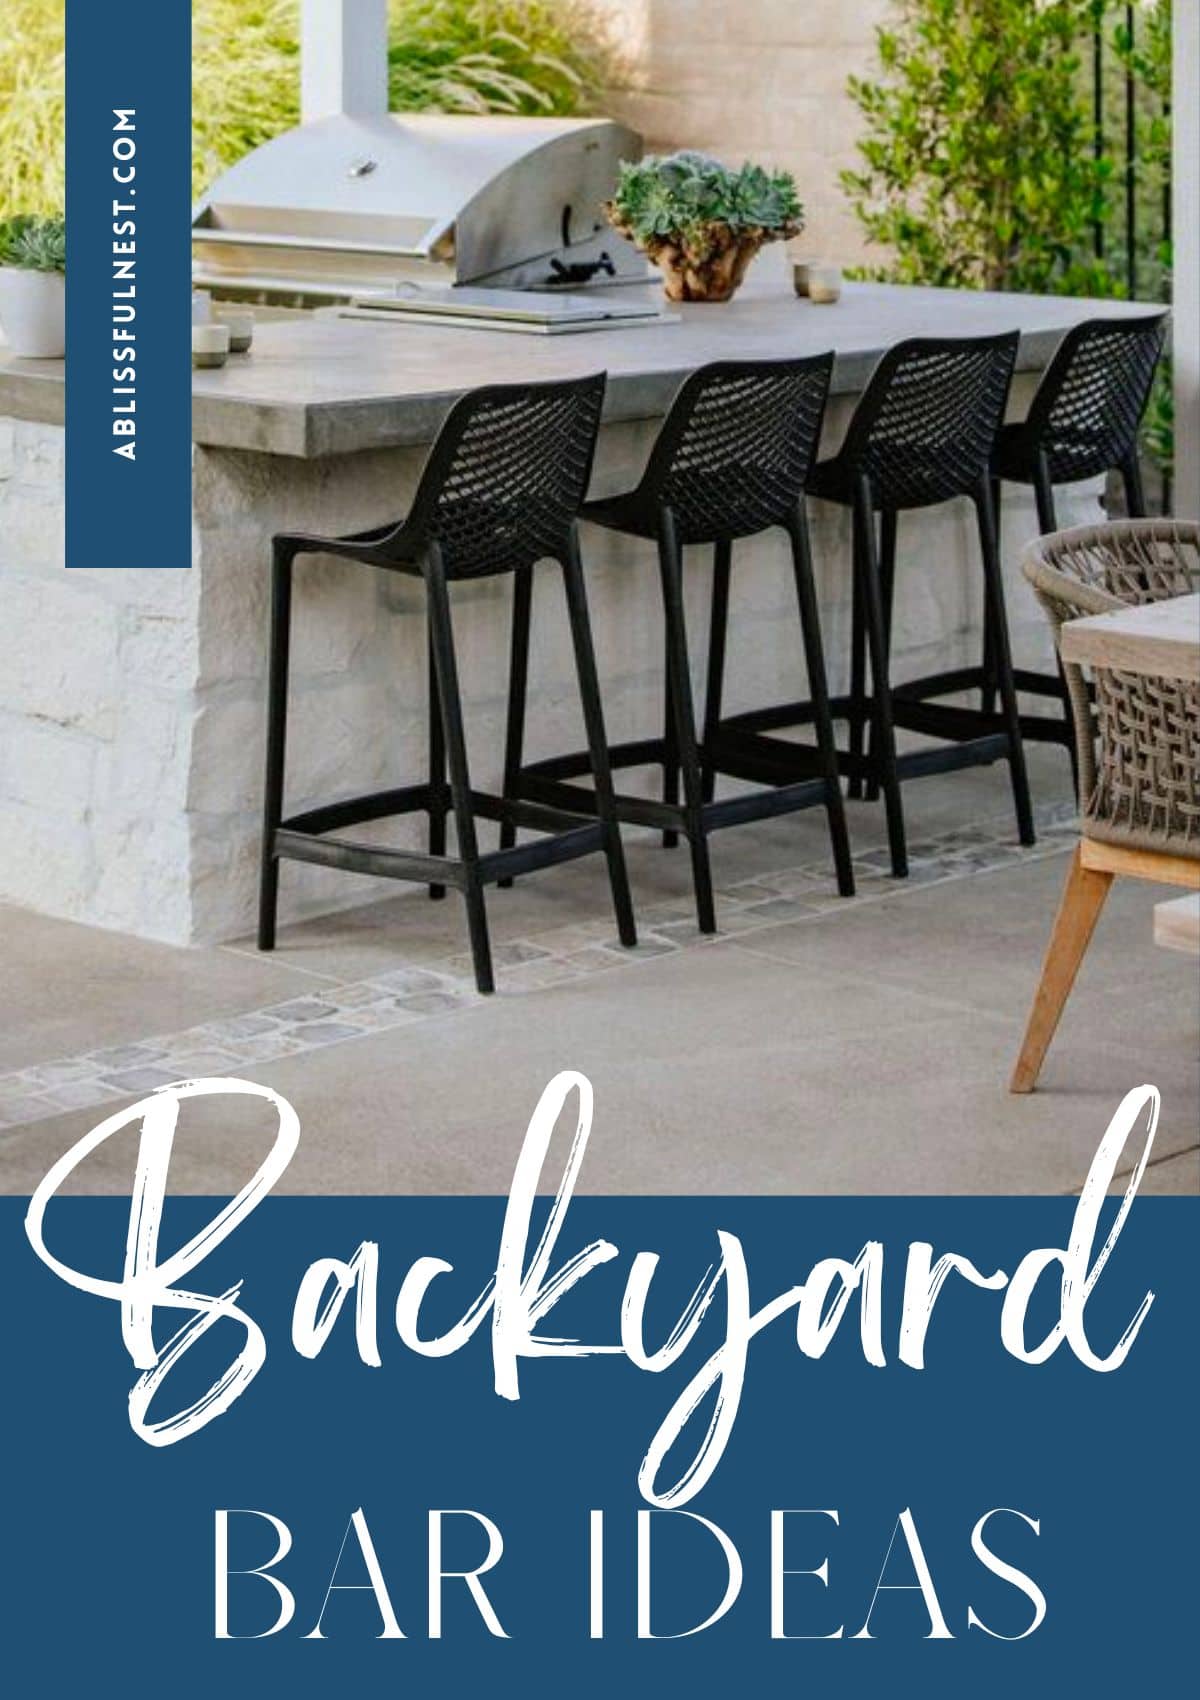 stone bar outside on a patio with black barstools